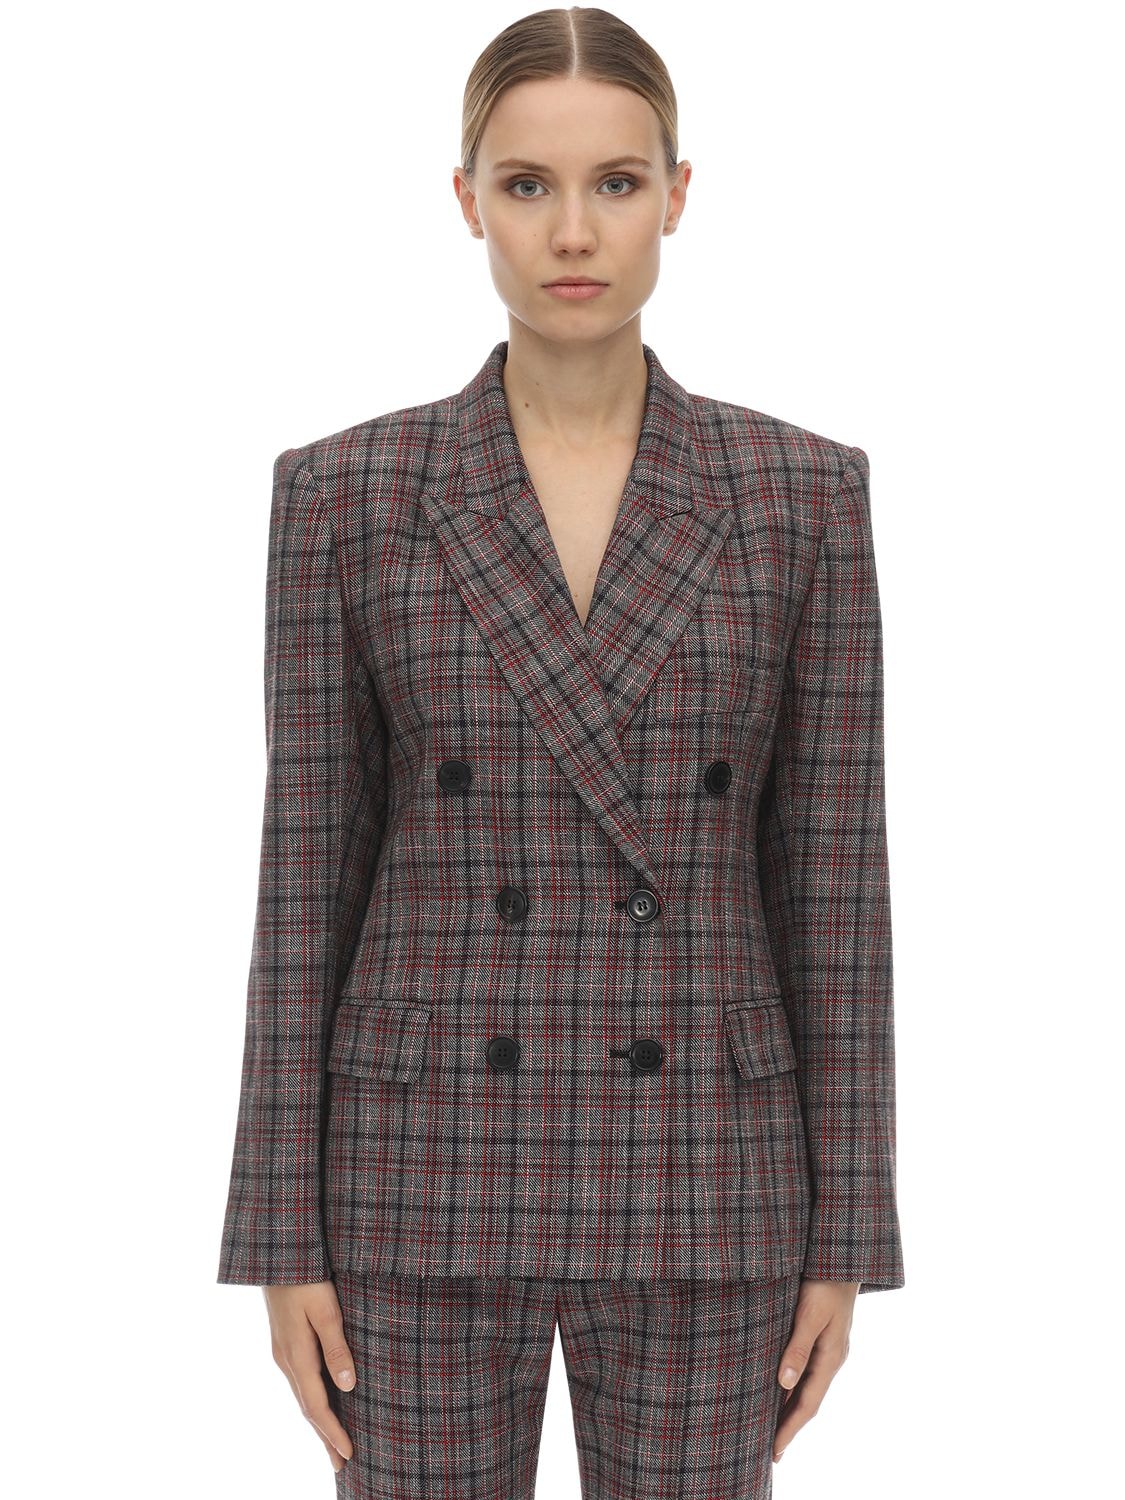 ISABEL MARANT DALLIN FITTED CHECK WOOL BLEND JACKET,70I1JT012-UKRCSW2